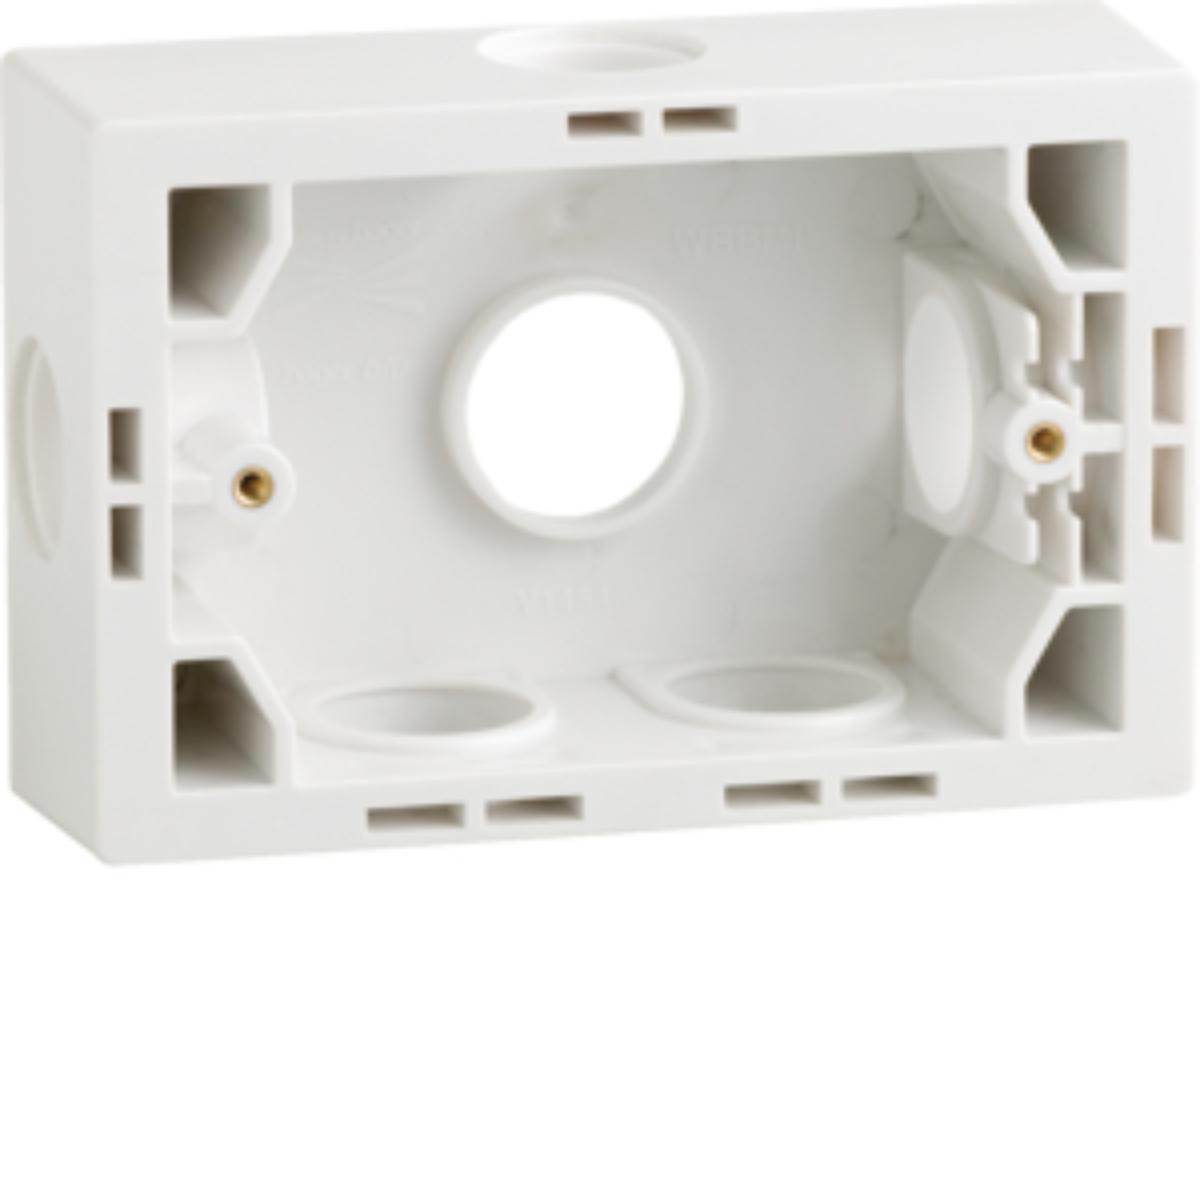 INSULATED MOUNTING BLOCK 32MM DEEP WHITE